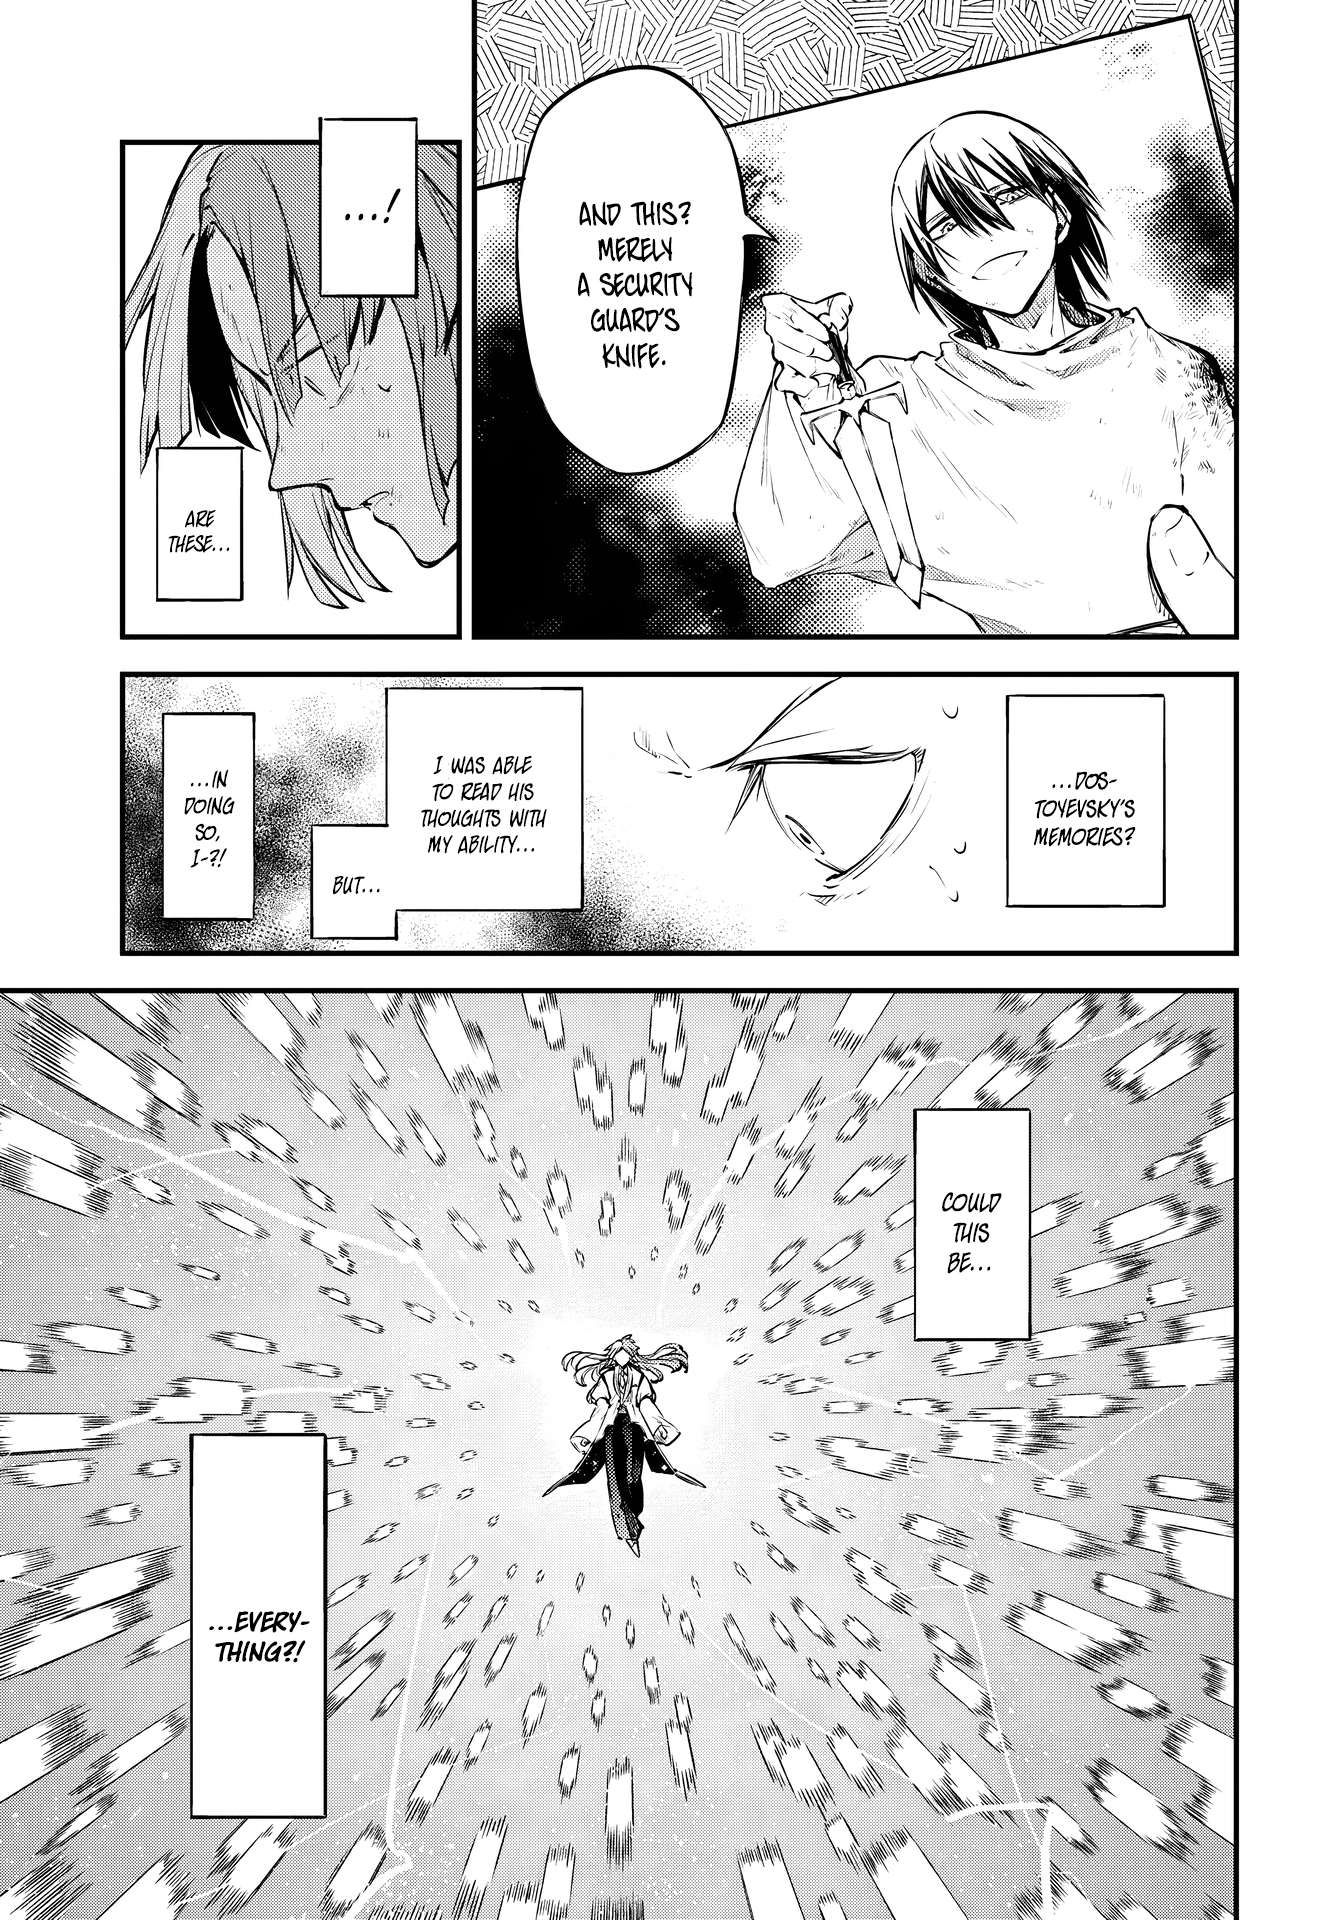 Bungo Stray Dogs chapter 113 page 5